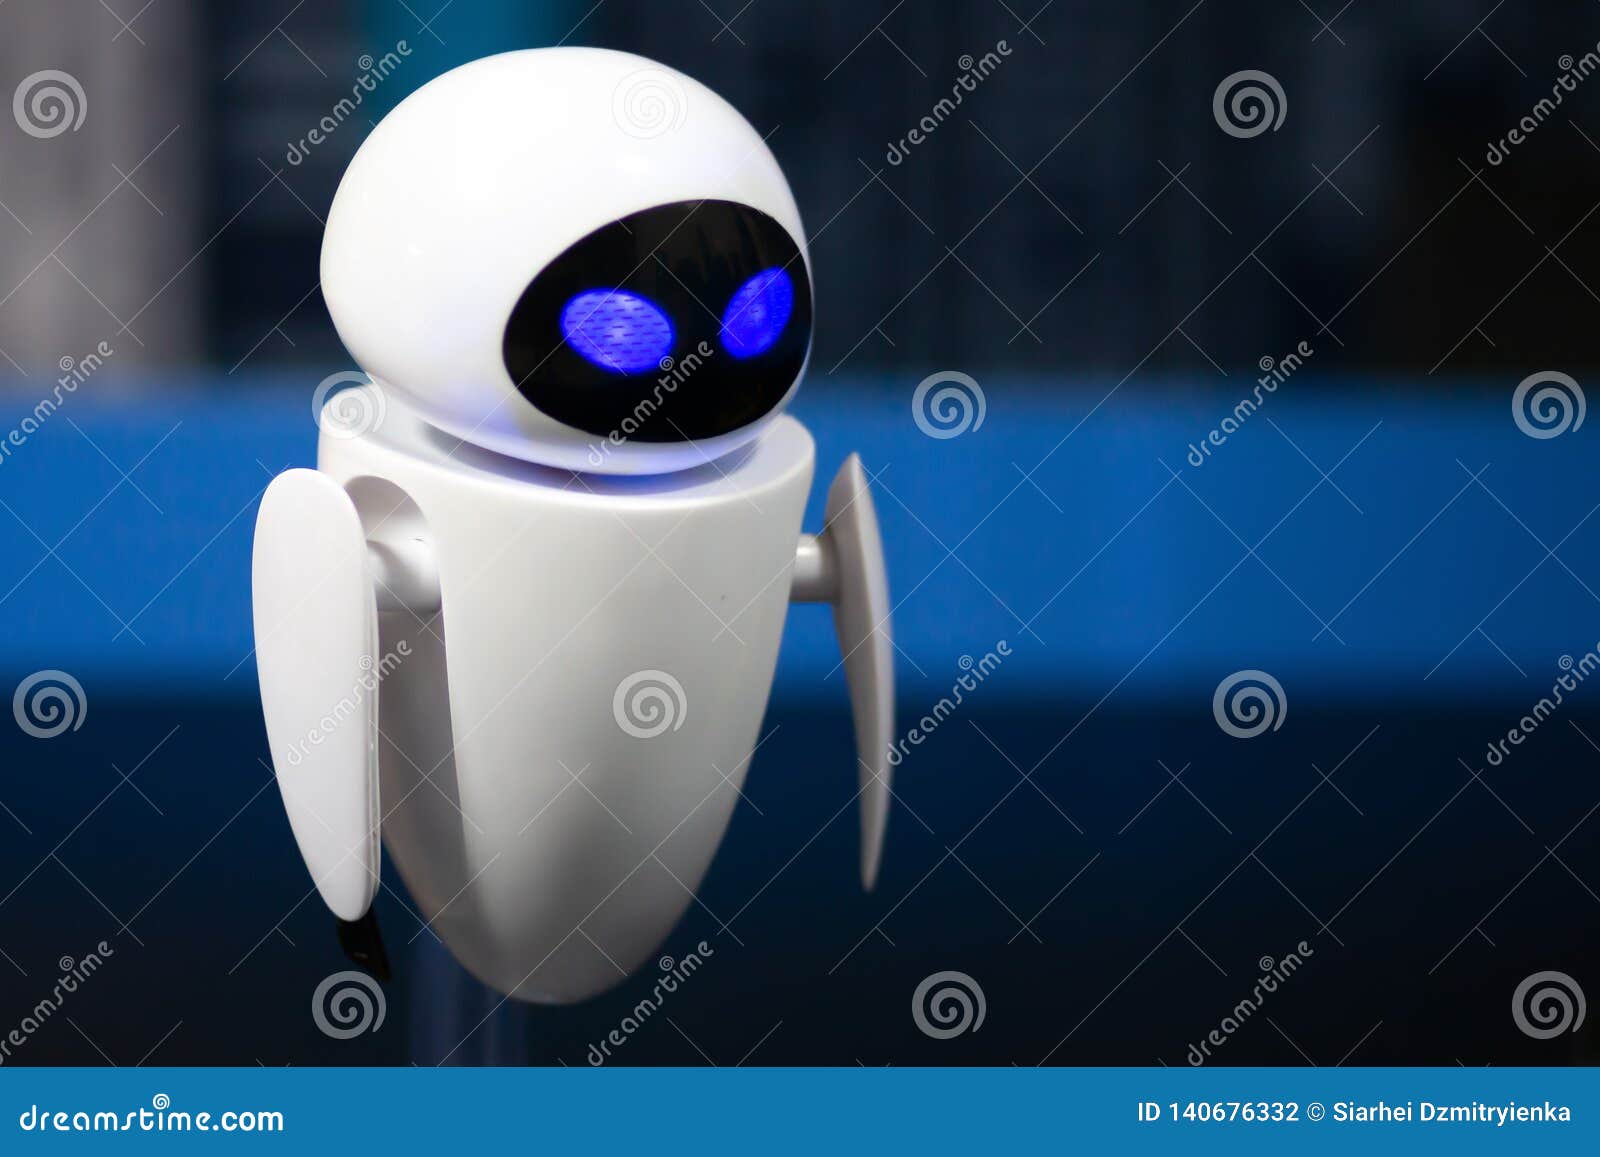 Robot Toy Character Form WALL-E Film by Disney Pixar Studio Editorial Photography - Image of technology, robots: 140676332